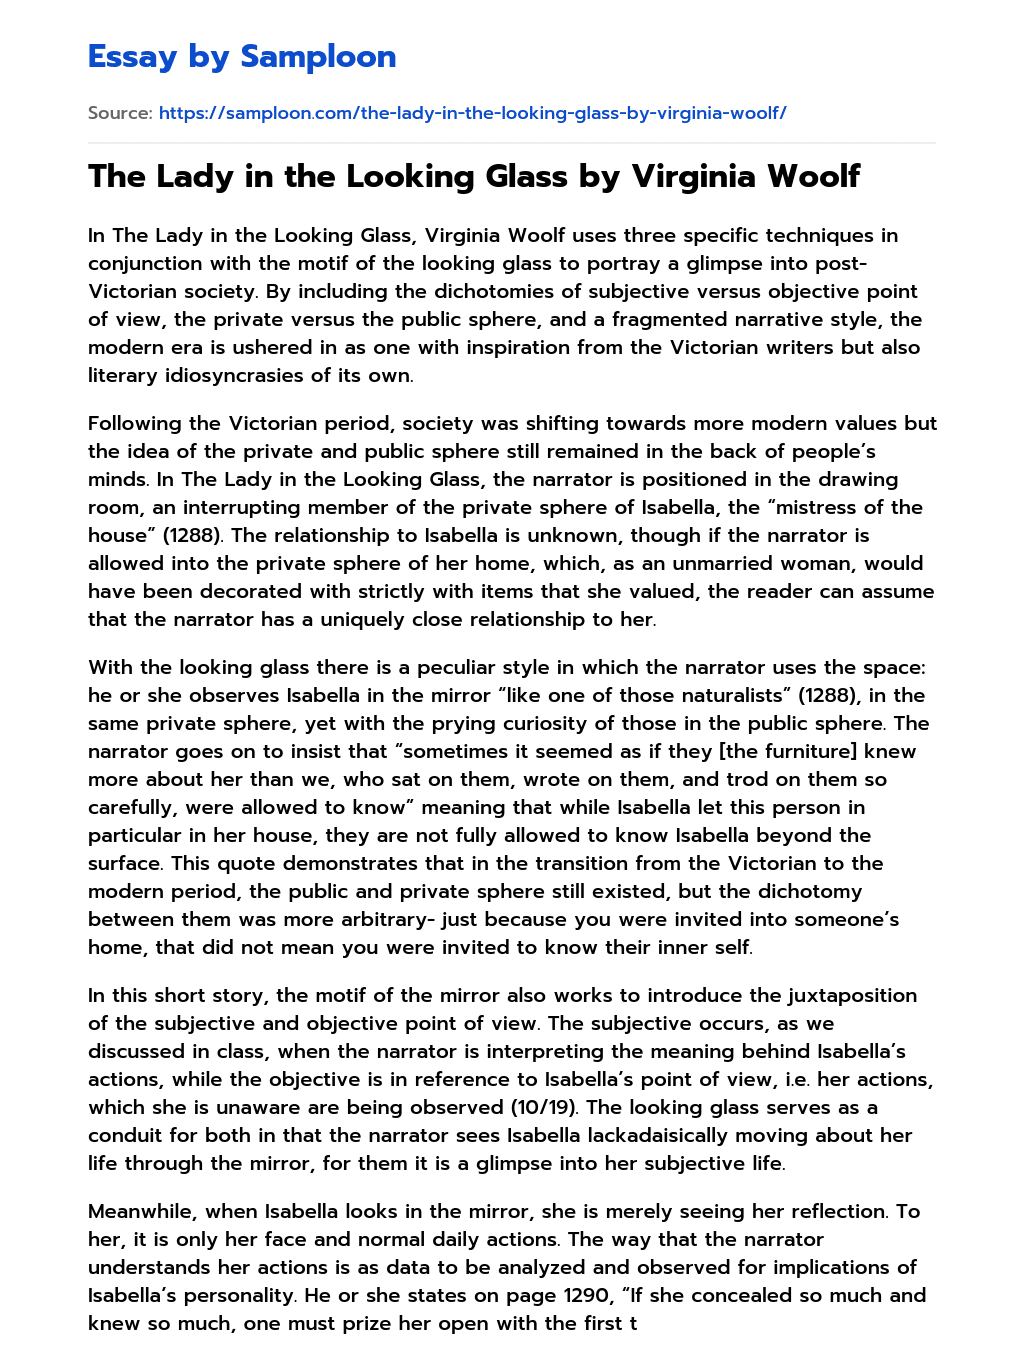 The Lady in the Looking Glass by Virginia Woolf essay